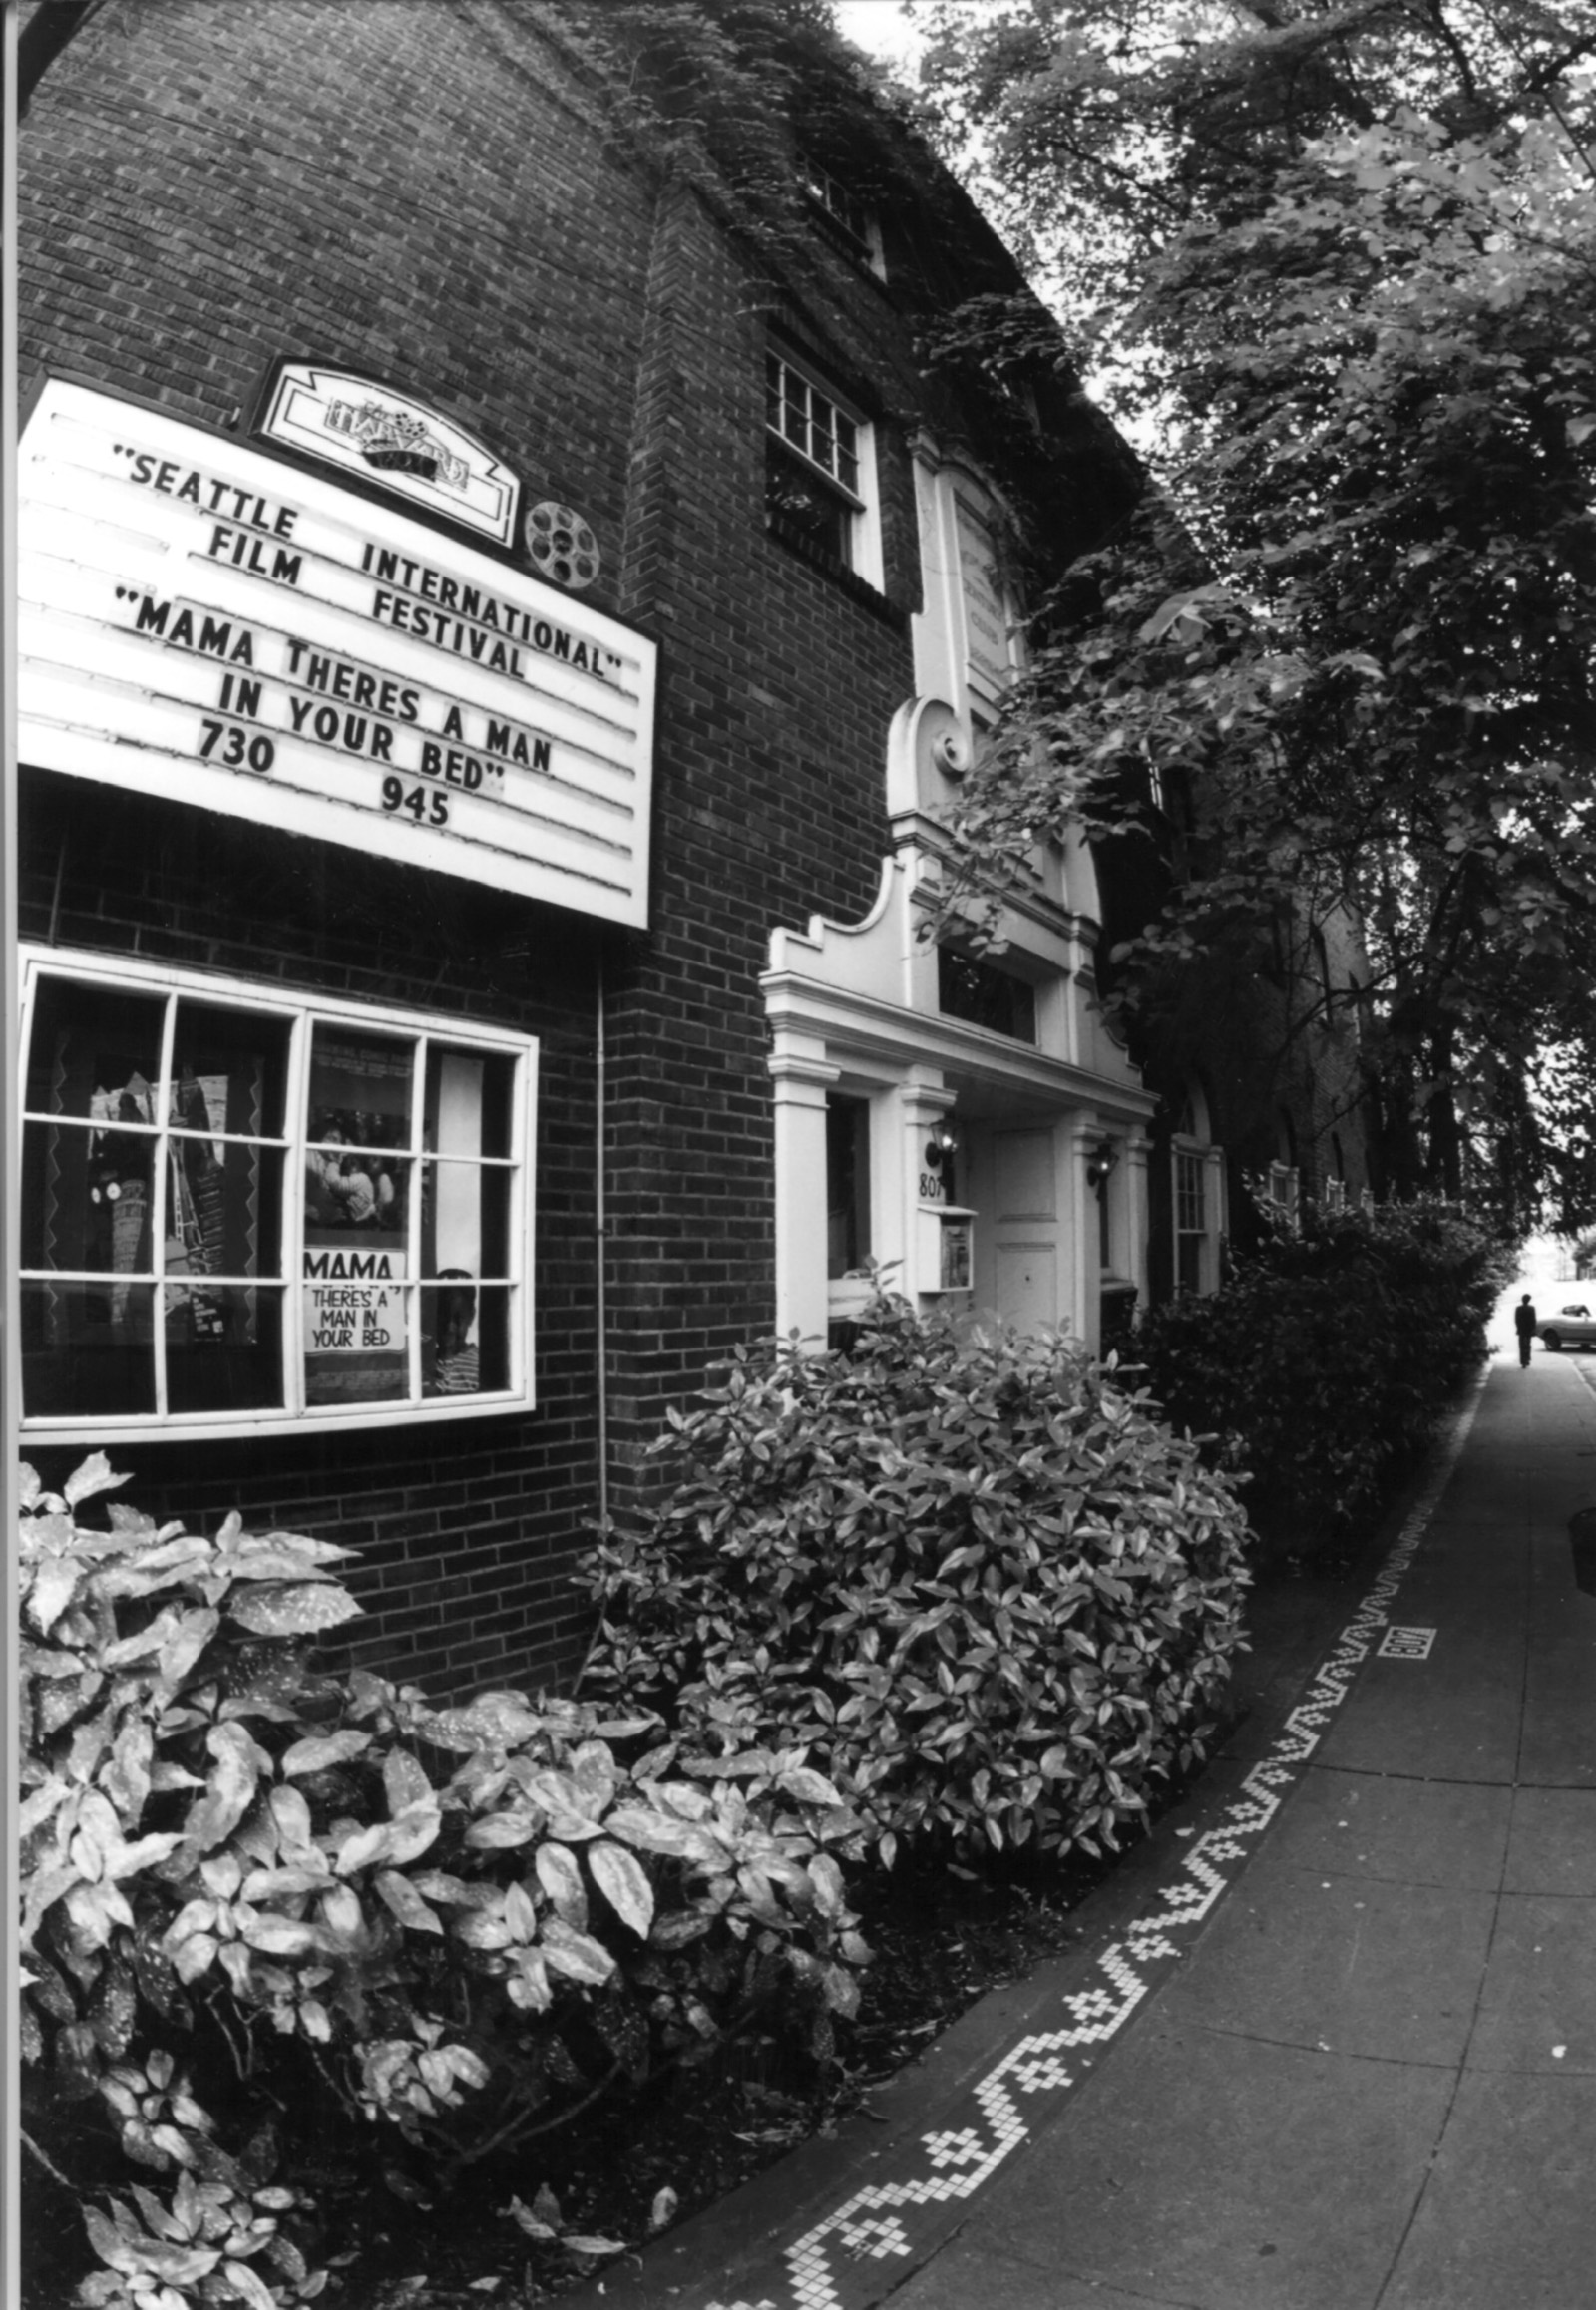 Harvard Exit Theatre, a SIFF venue starting in 1989, announcing the upcoming 16th Seattle International Film Festival 